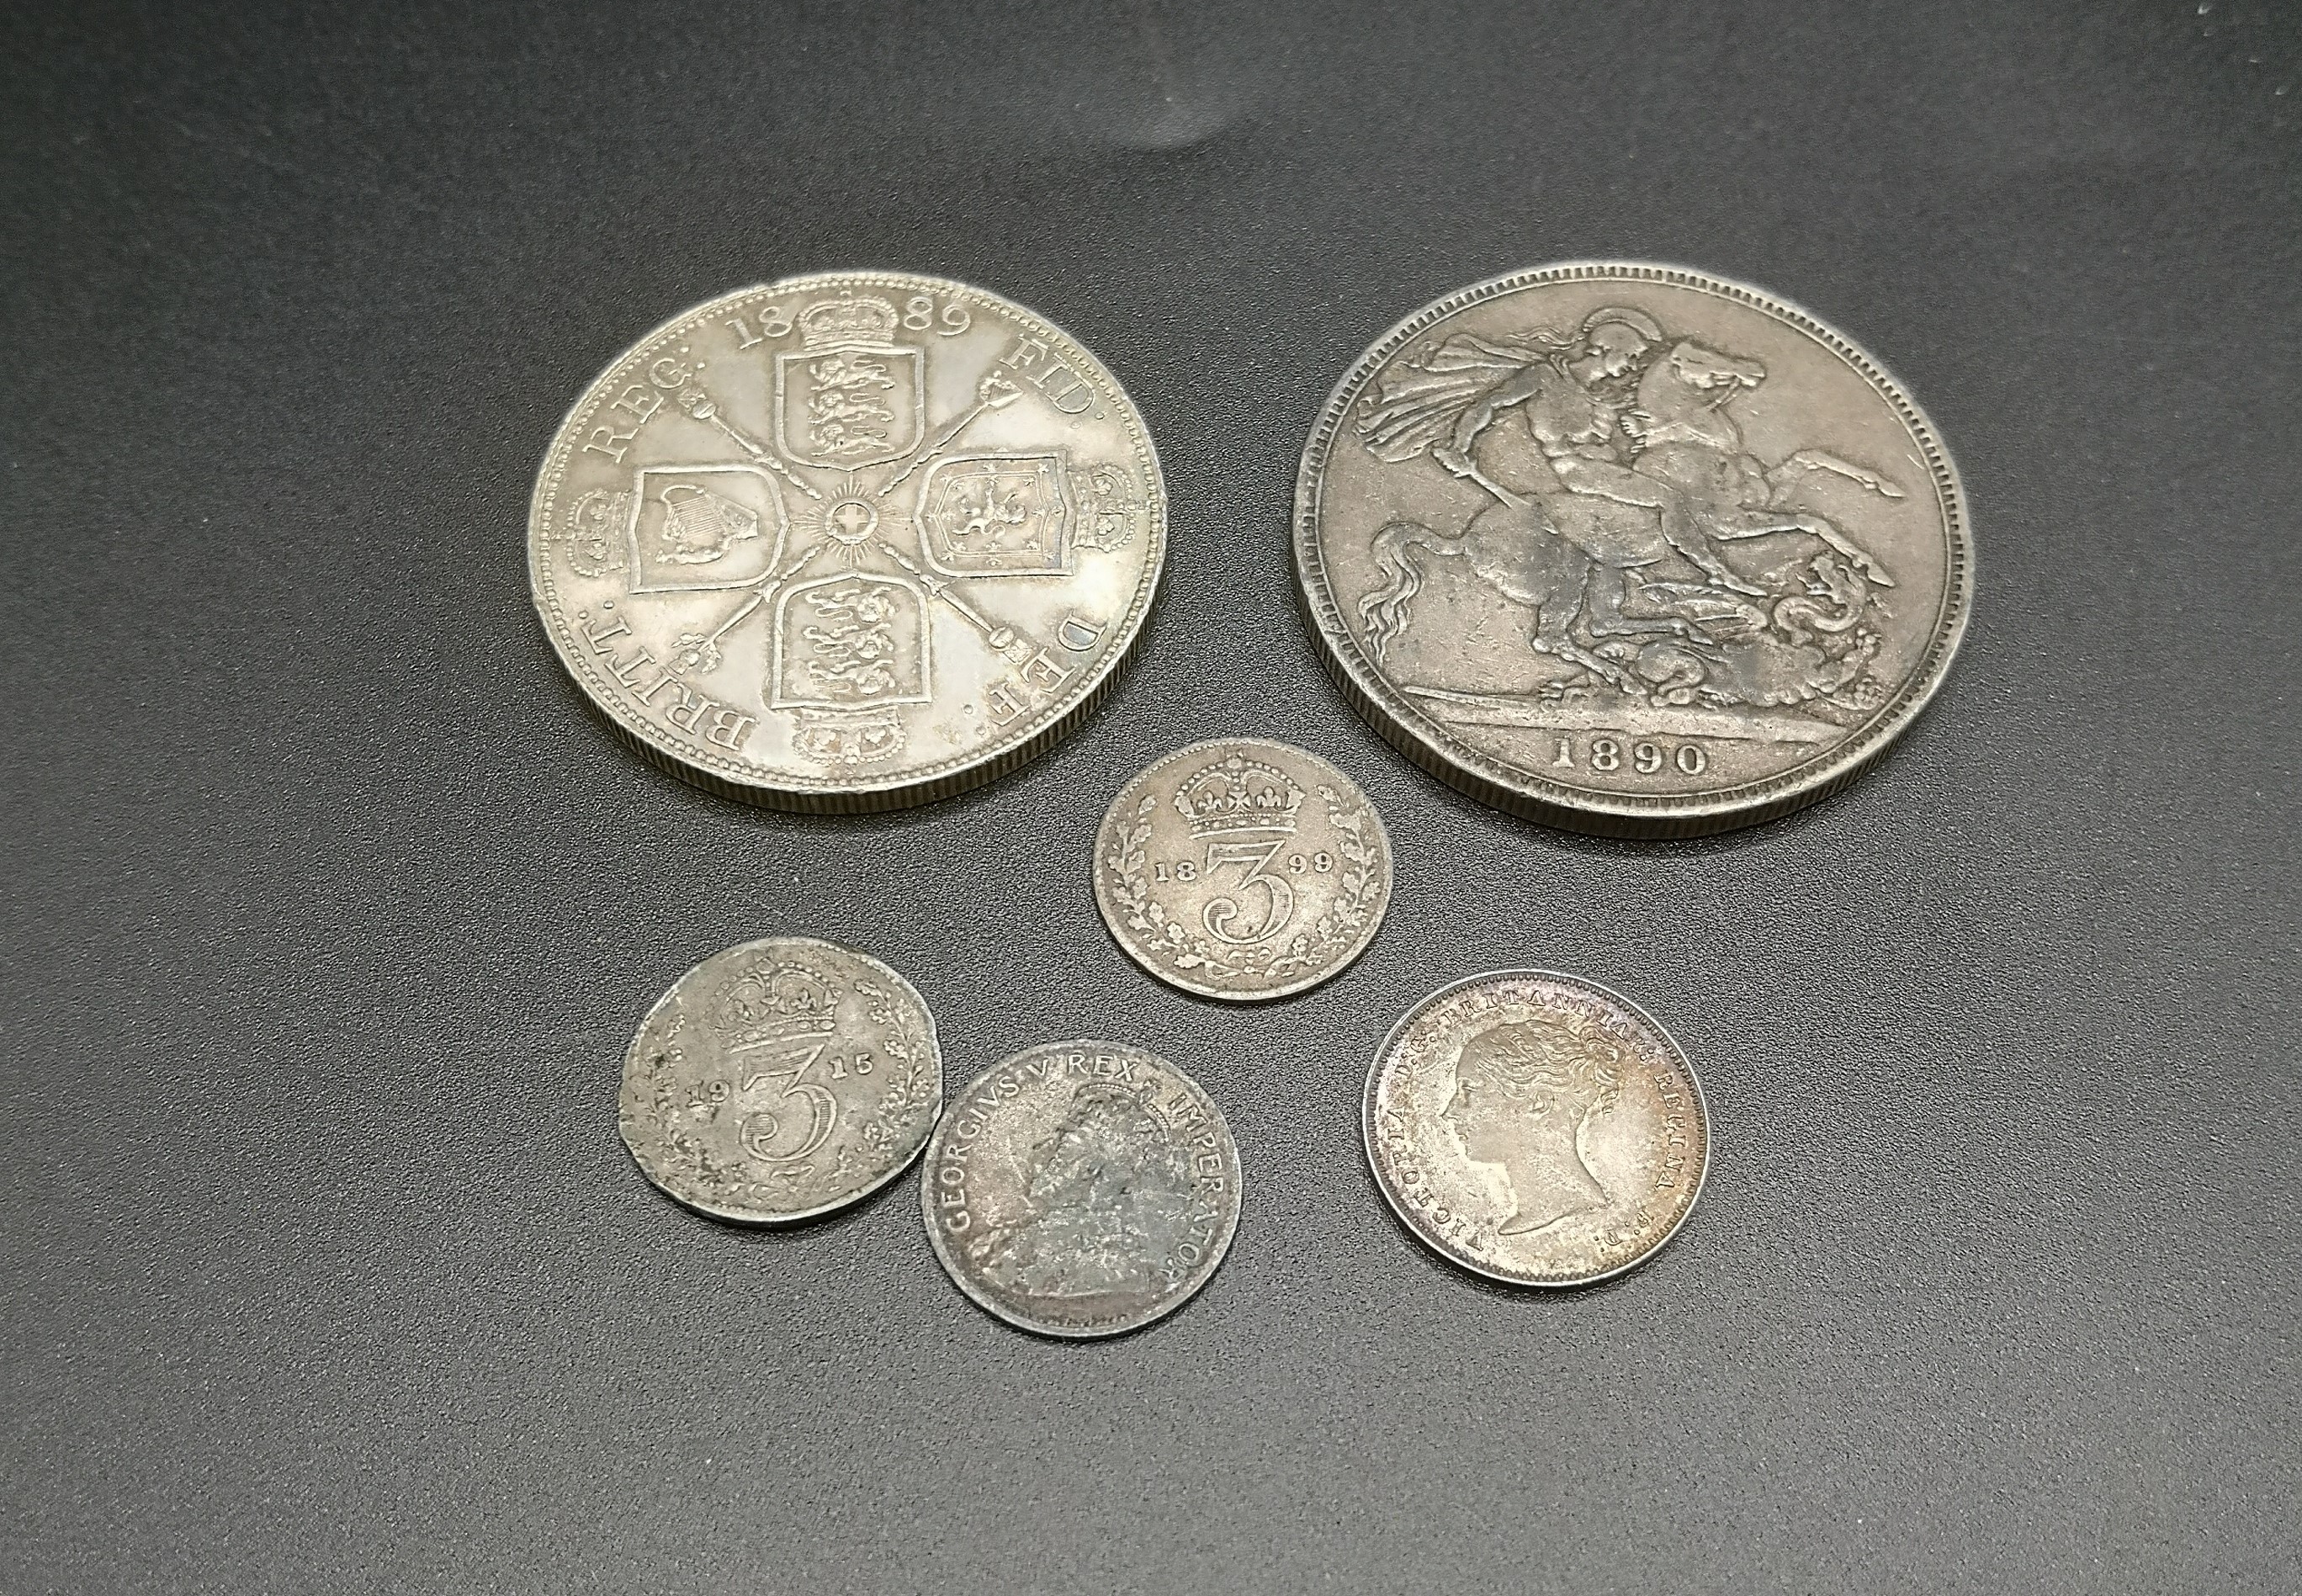 Queen Victoria crown 1890, double florin 1889, and 4 other silver coins